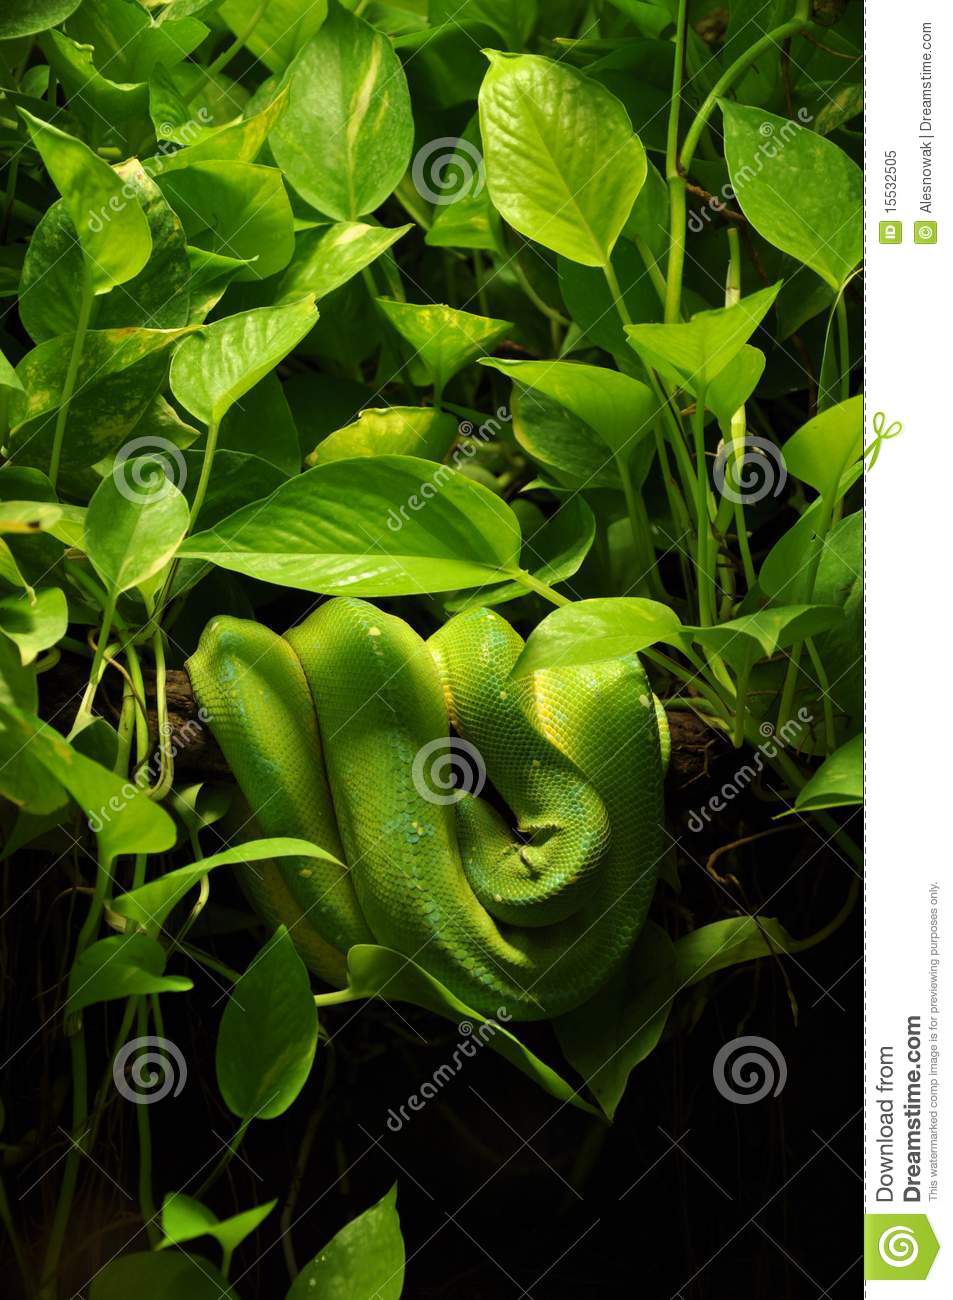 Snake In Jungle Royalty Free Stock Photo   Image  15532505